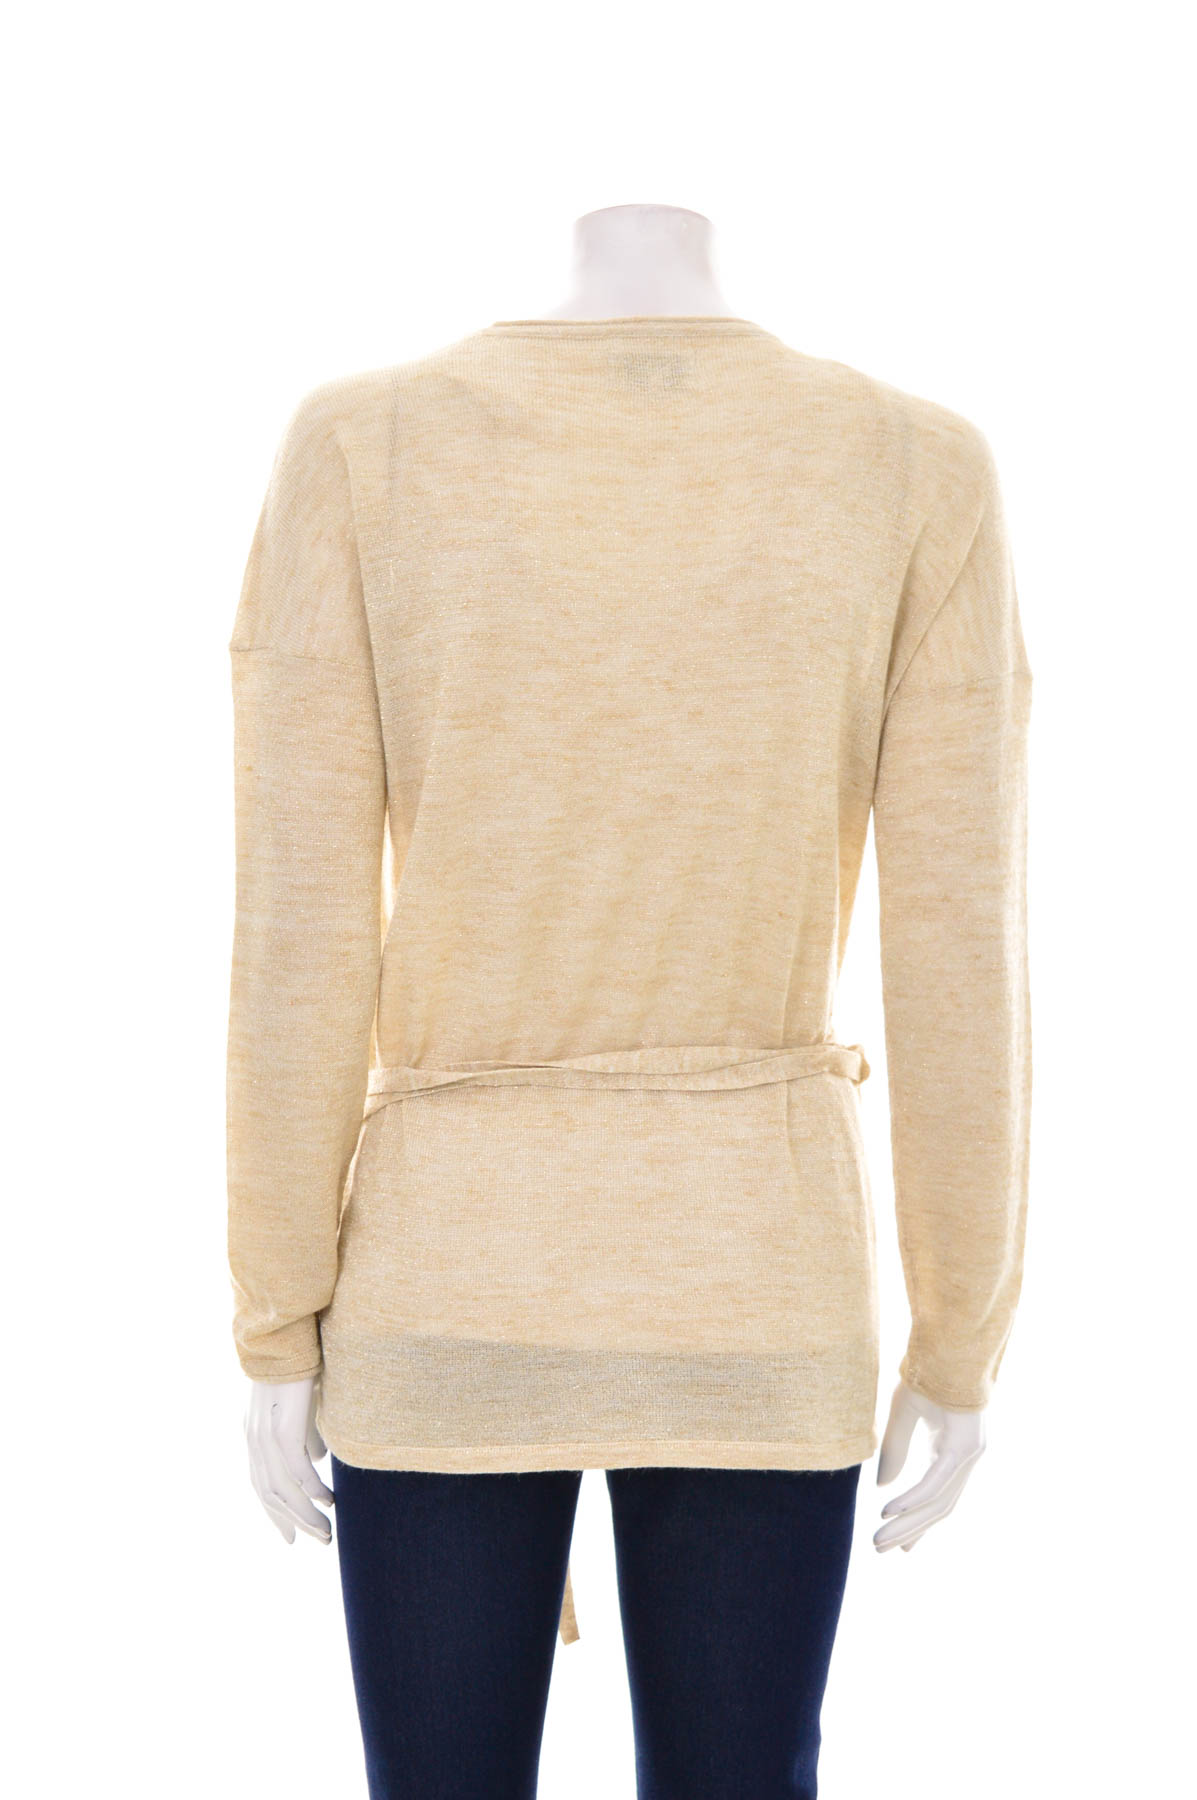 Women's cardigan - ONLY - 1